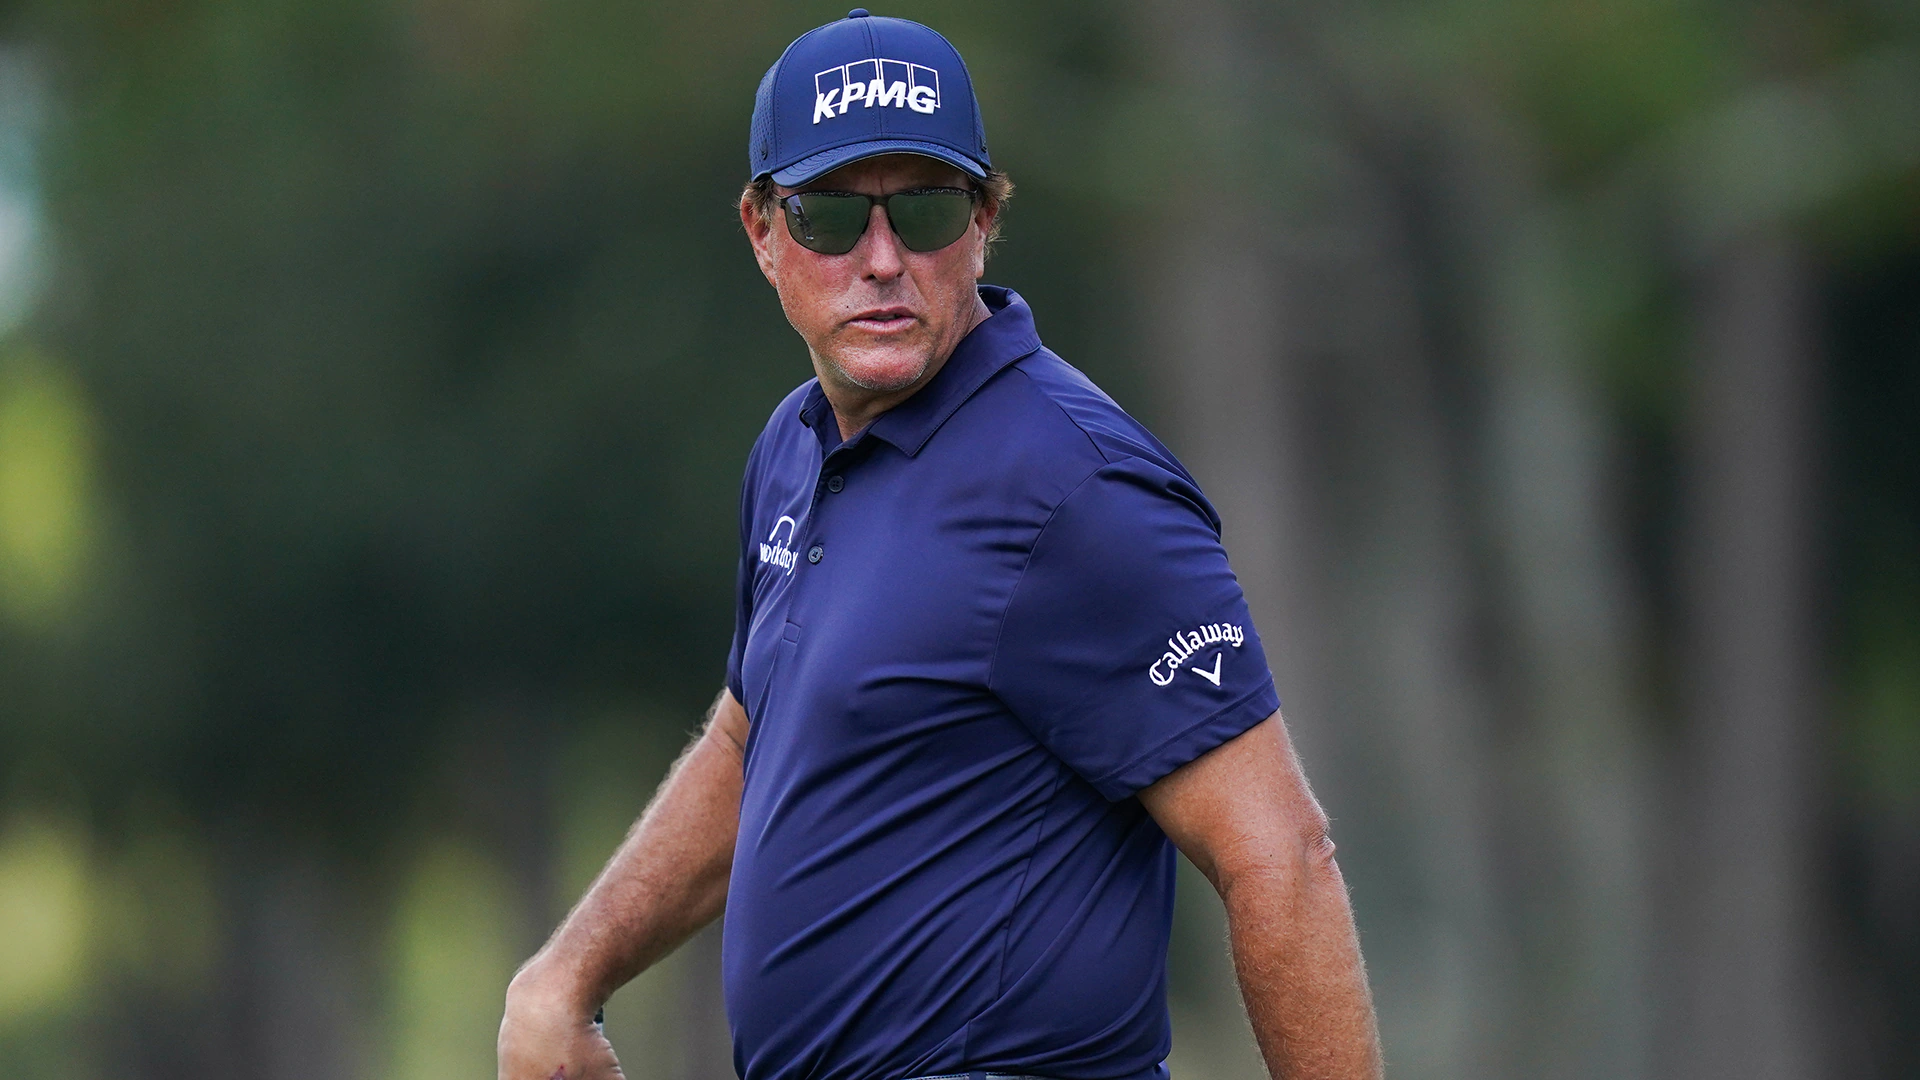 As speculation of a return increases, video reportedly shows Phil Mickelson practicing